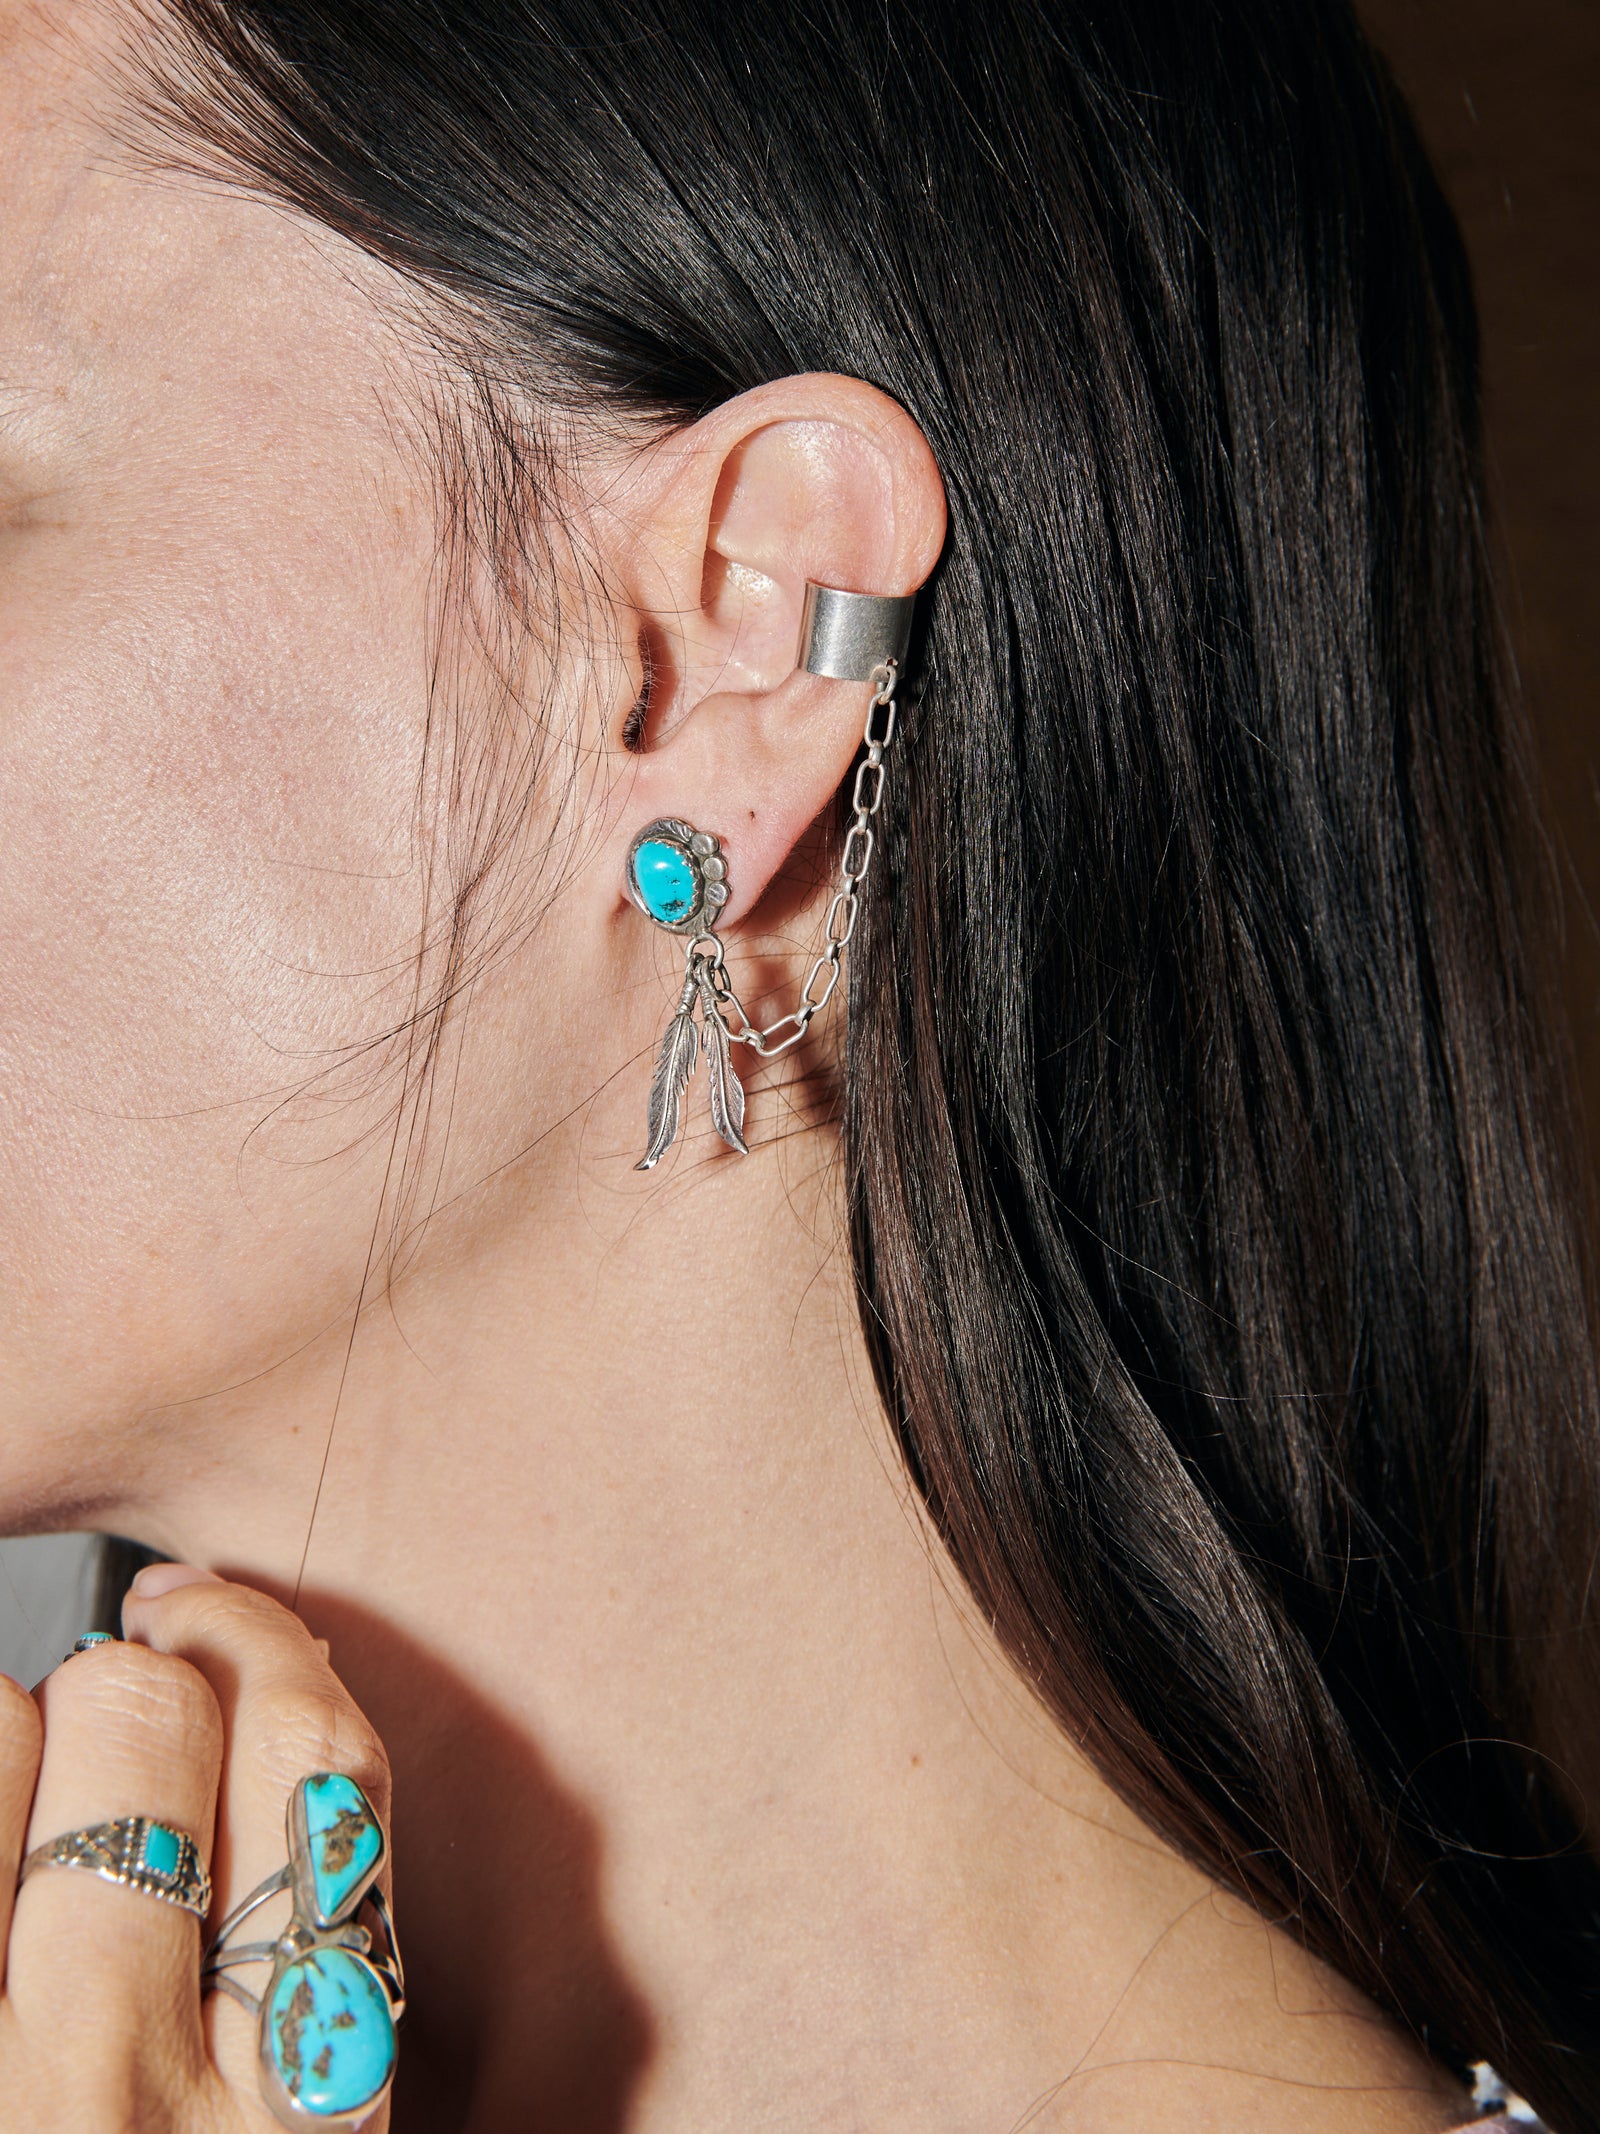 Turquoise Earring And Cuff Side Close-up Worn View